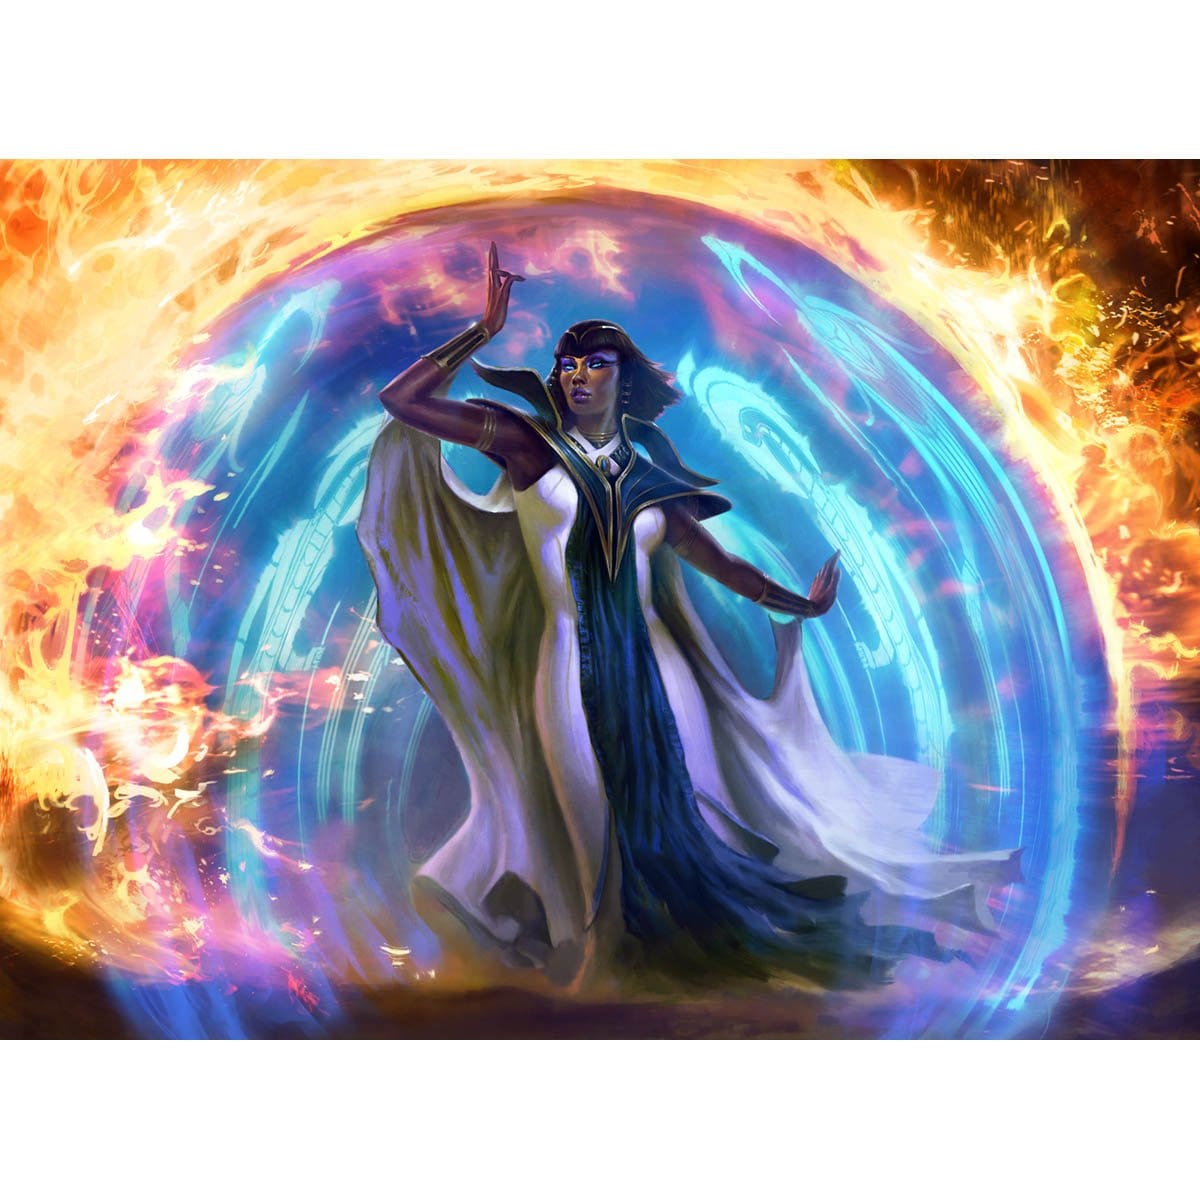 Cancel Print - Print - Original Magic Art - Accessories for Magic the Gathering and other card games